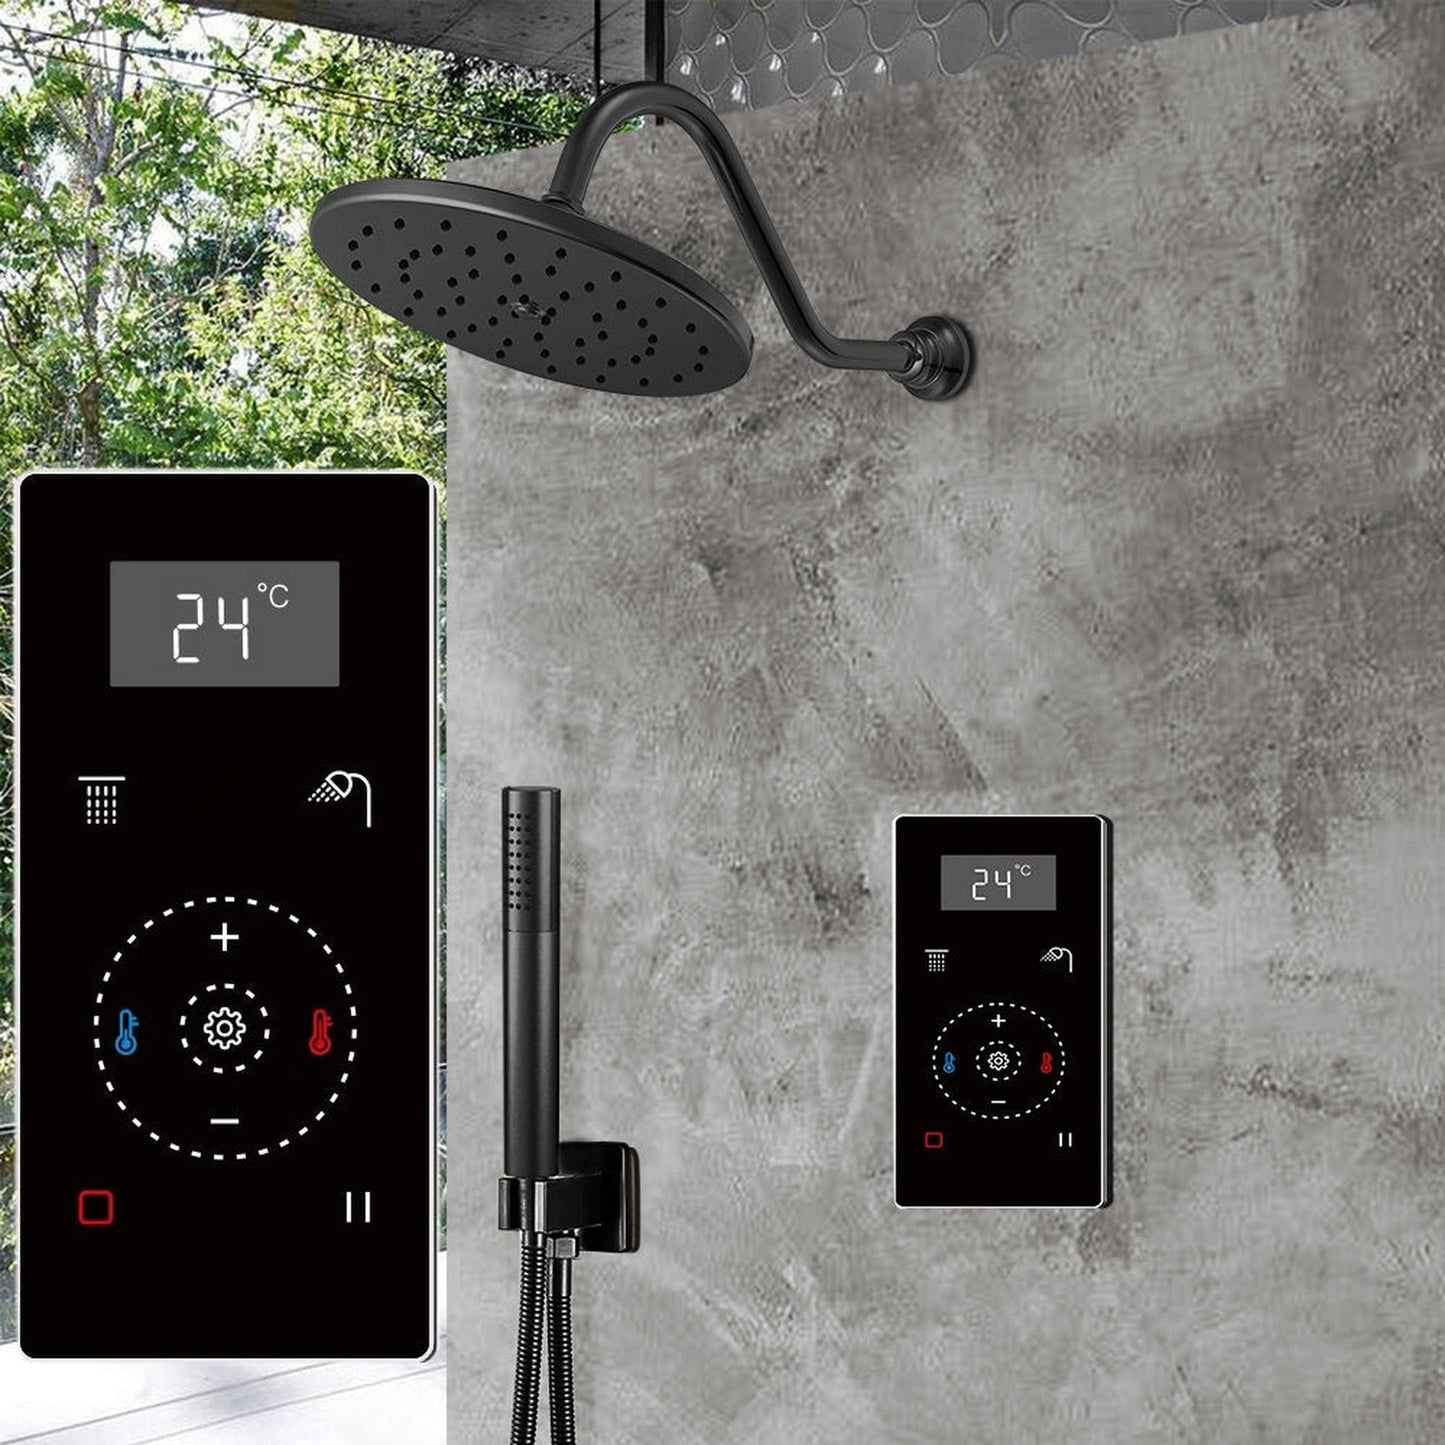 Fontana 16" Matte Black Round Wall-Mounted Automatic Thermostatic Shower With Black Digital Touch Screen Shower Mixer Display 2-Function Rainfall Shower Set With Hand Shower